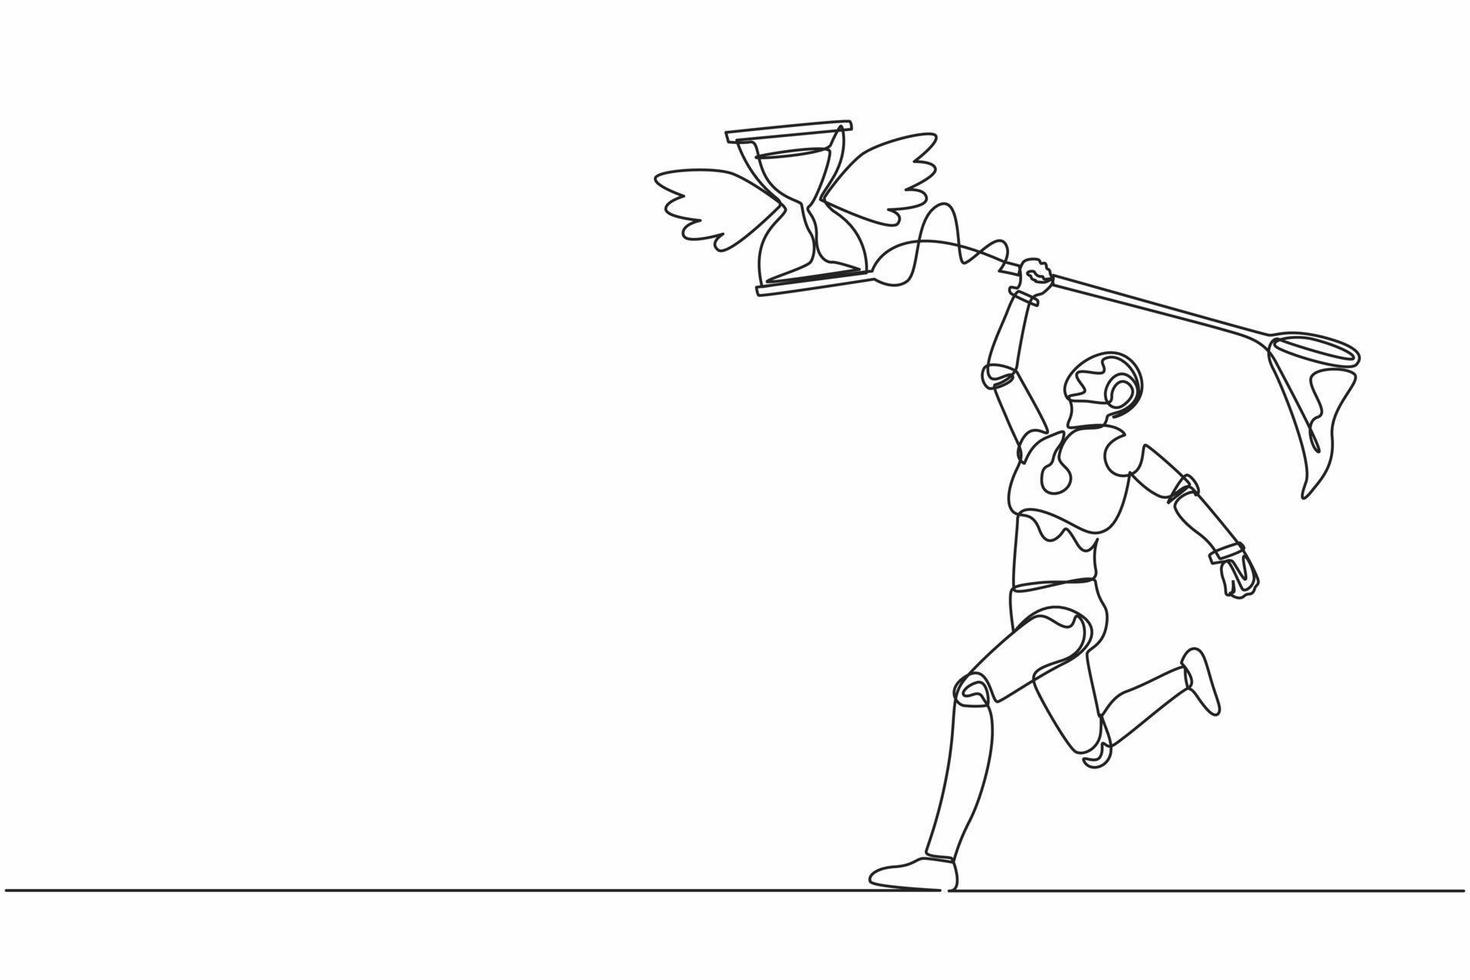 Continuous one line drawing robot try to catching flying hourglass with butterfly net. Stress, deadlines, depression of work. Humanoid cybernetic organism. Single line draw design vector illustration